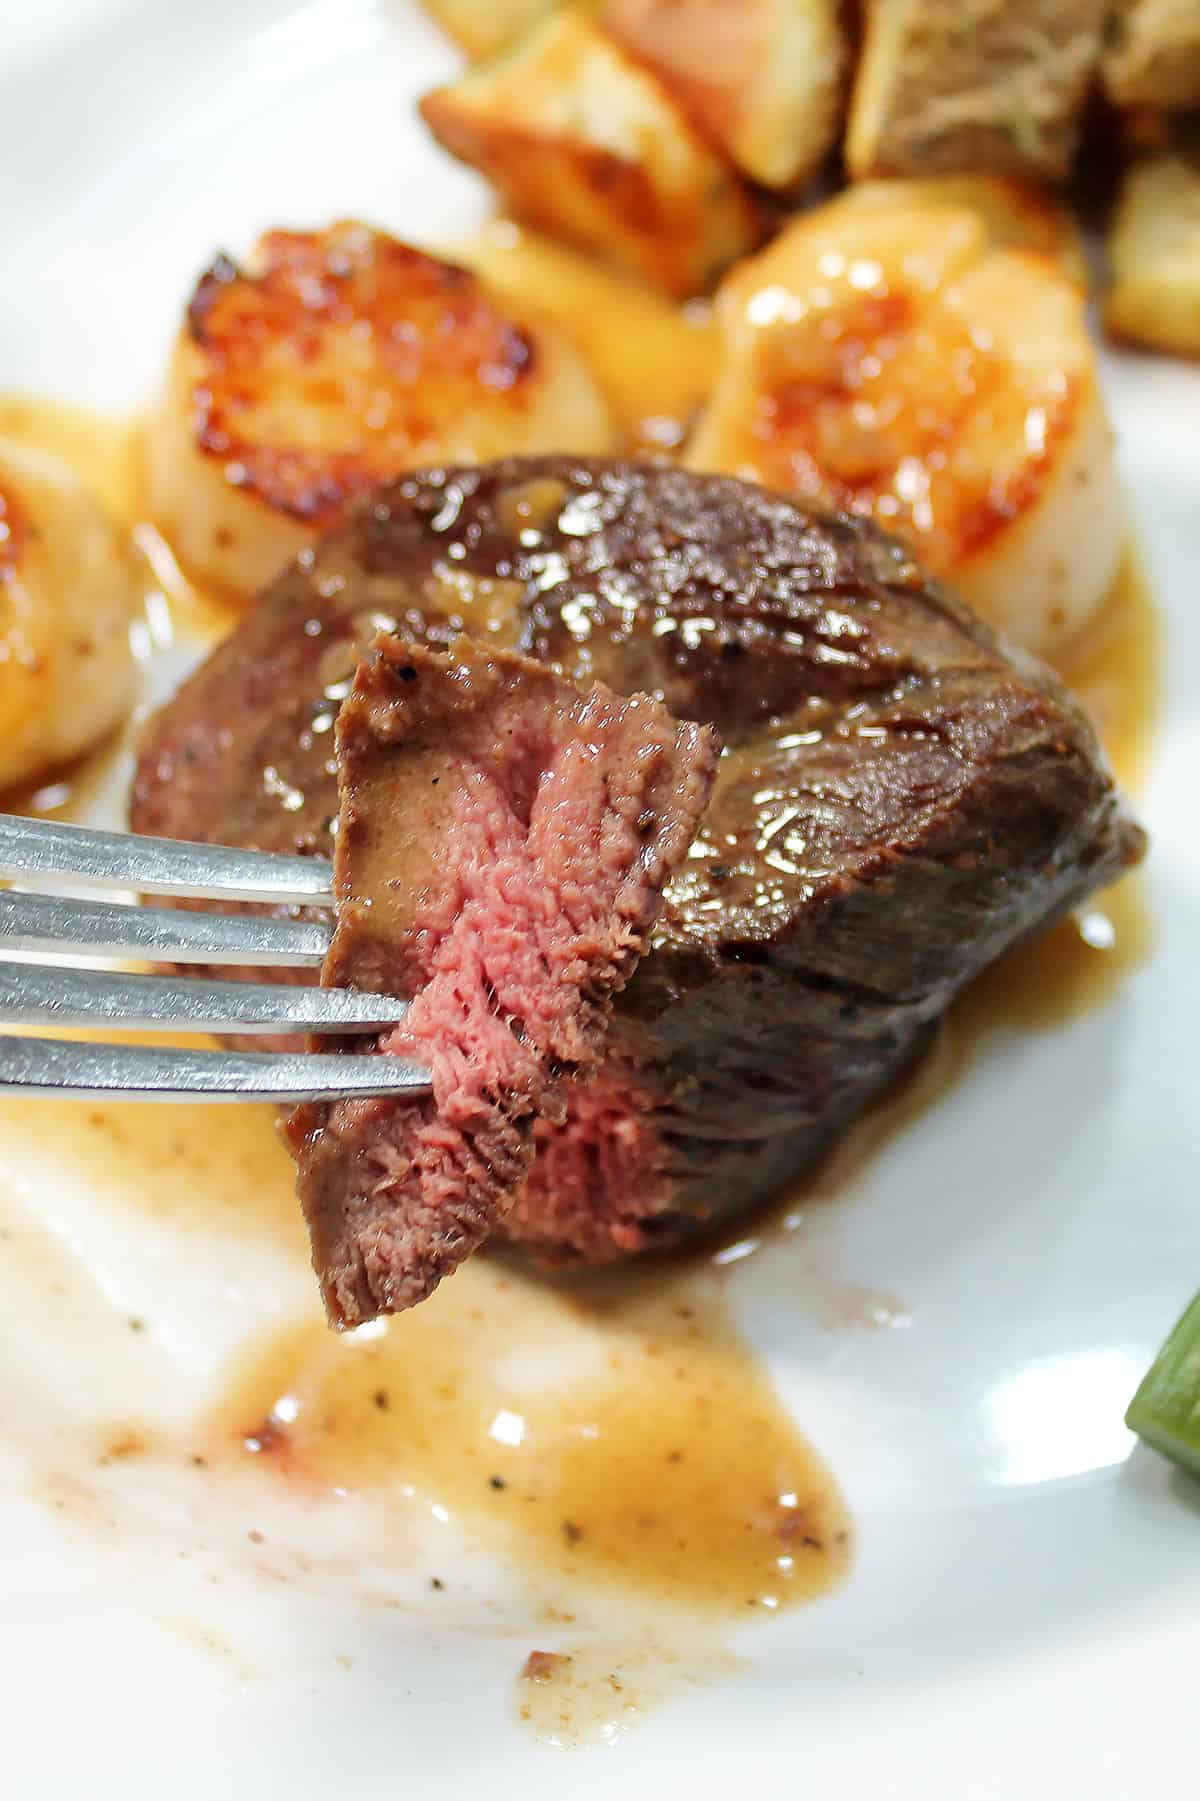 Holding bite of filet mignon on fork over plate of steak and scallops.